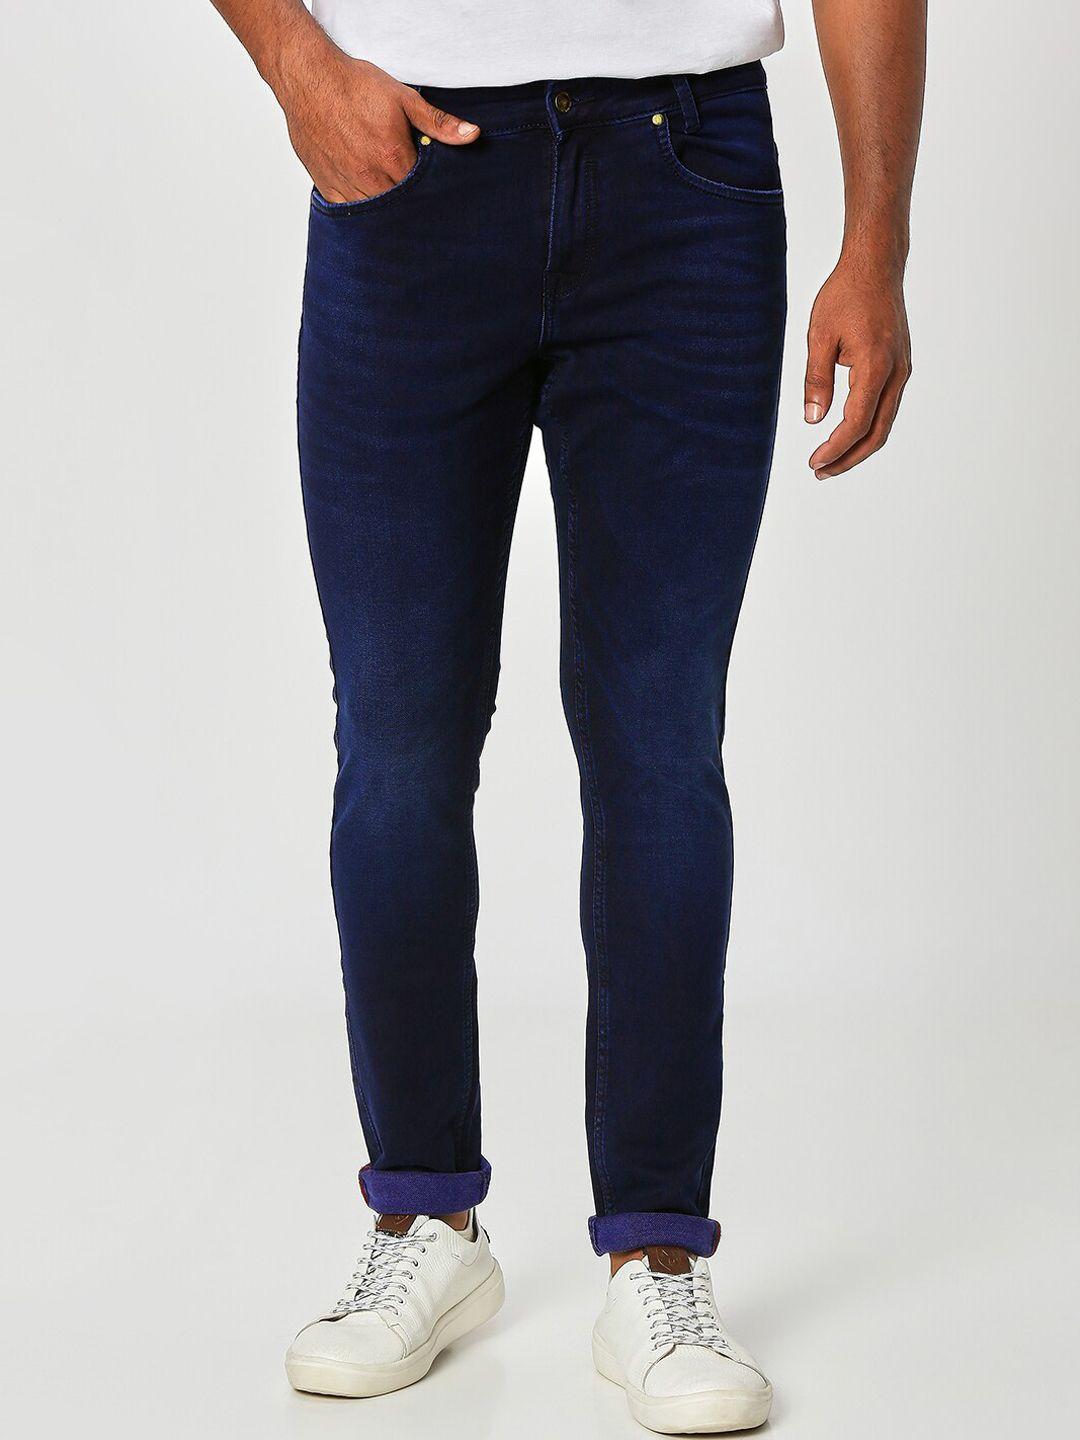 mufti-men-skinny-fit-stretchable-jeans